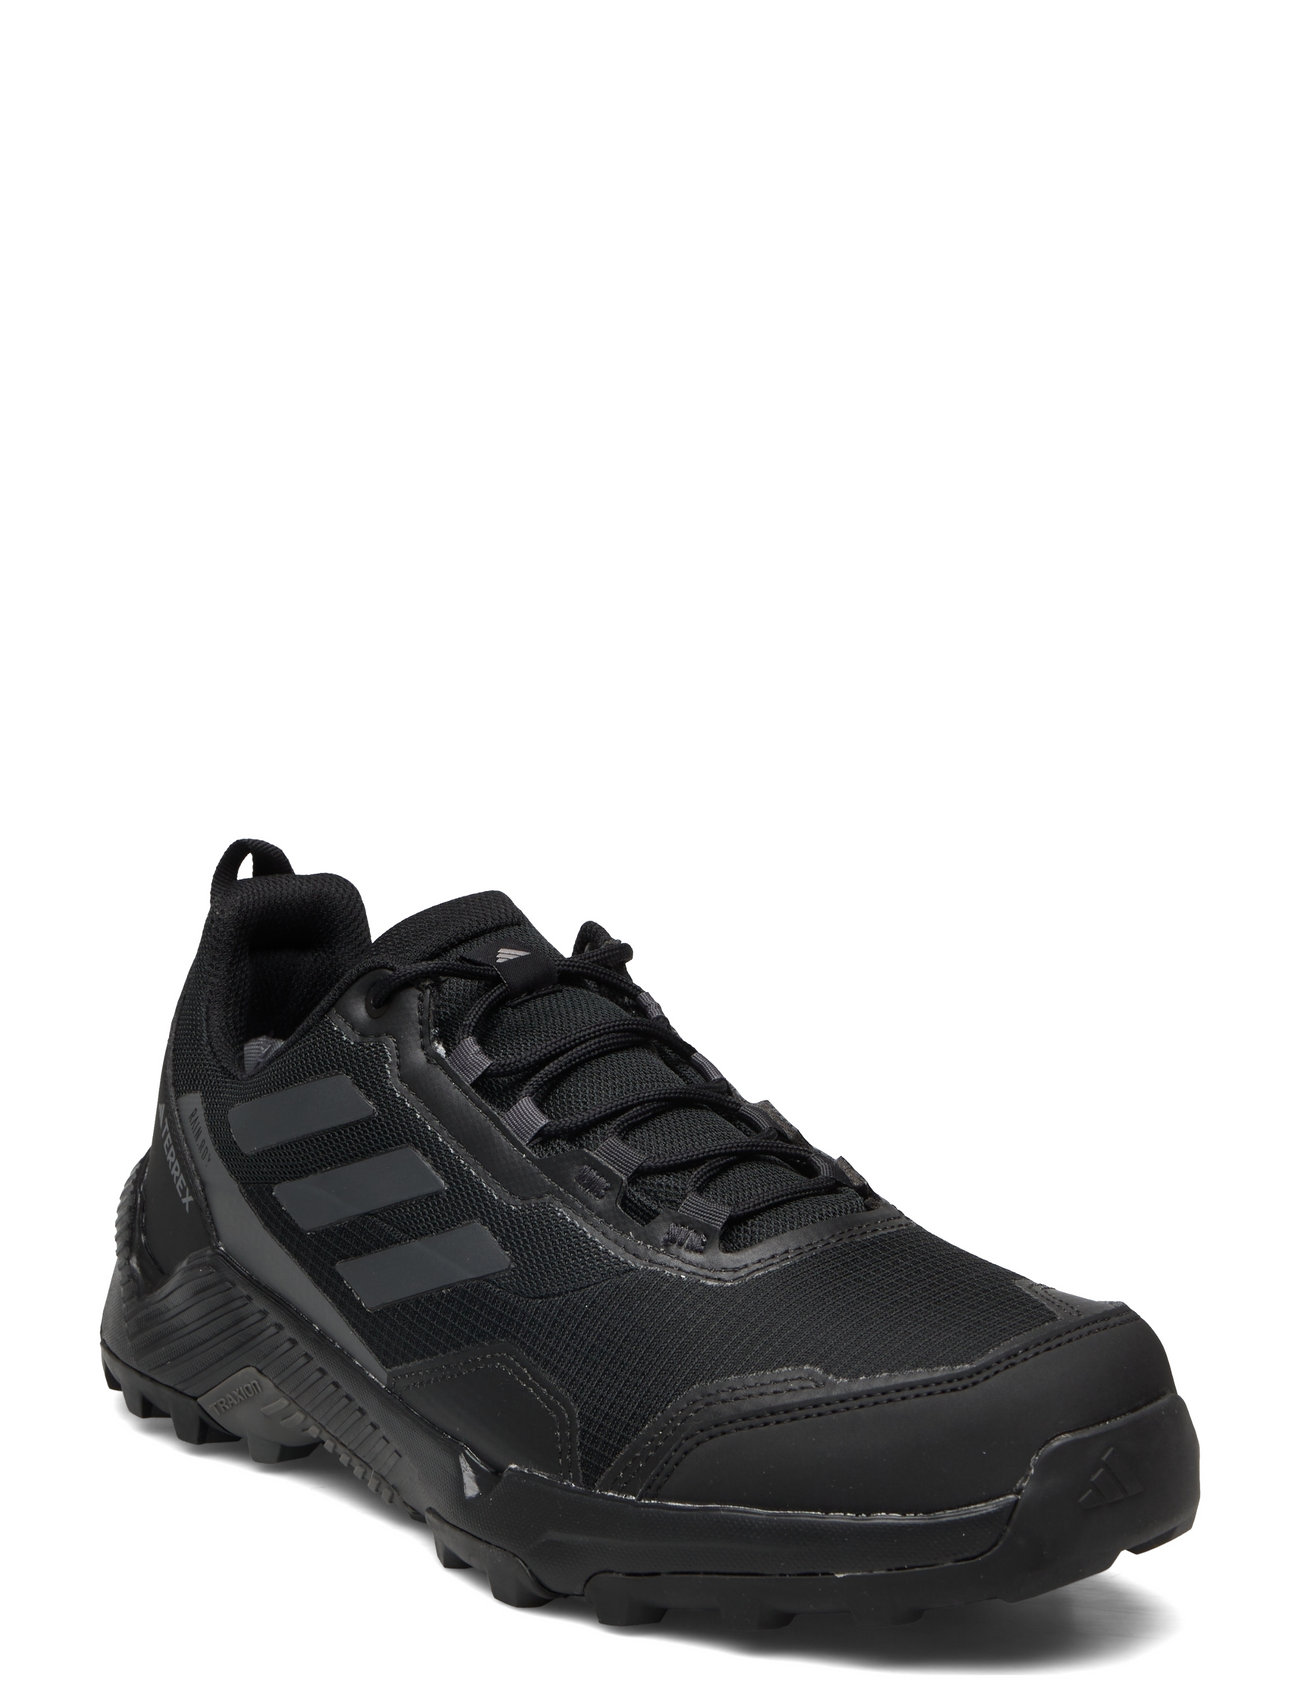 Eastrail 2.0 Rain.rdy Hiking Shoes Sport Sport Shoes Outdoor-hiking Shoes Black Adidas Terrex